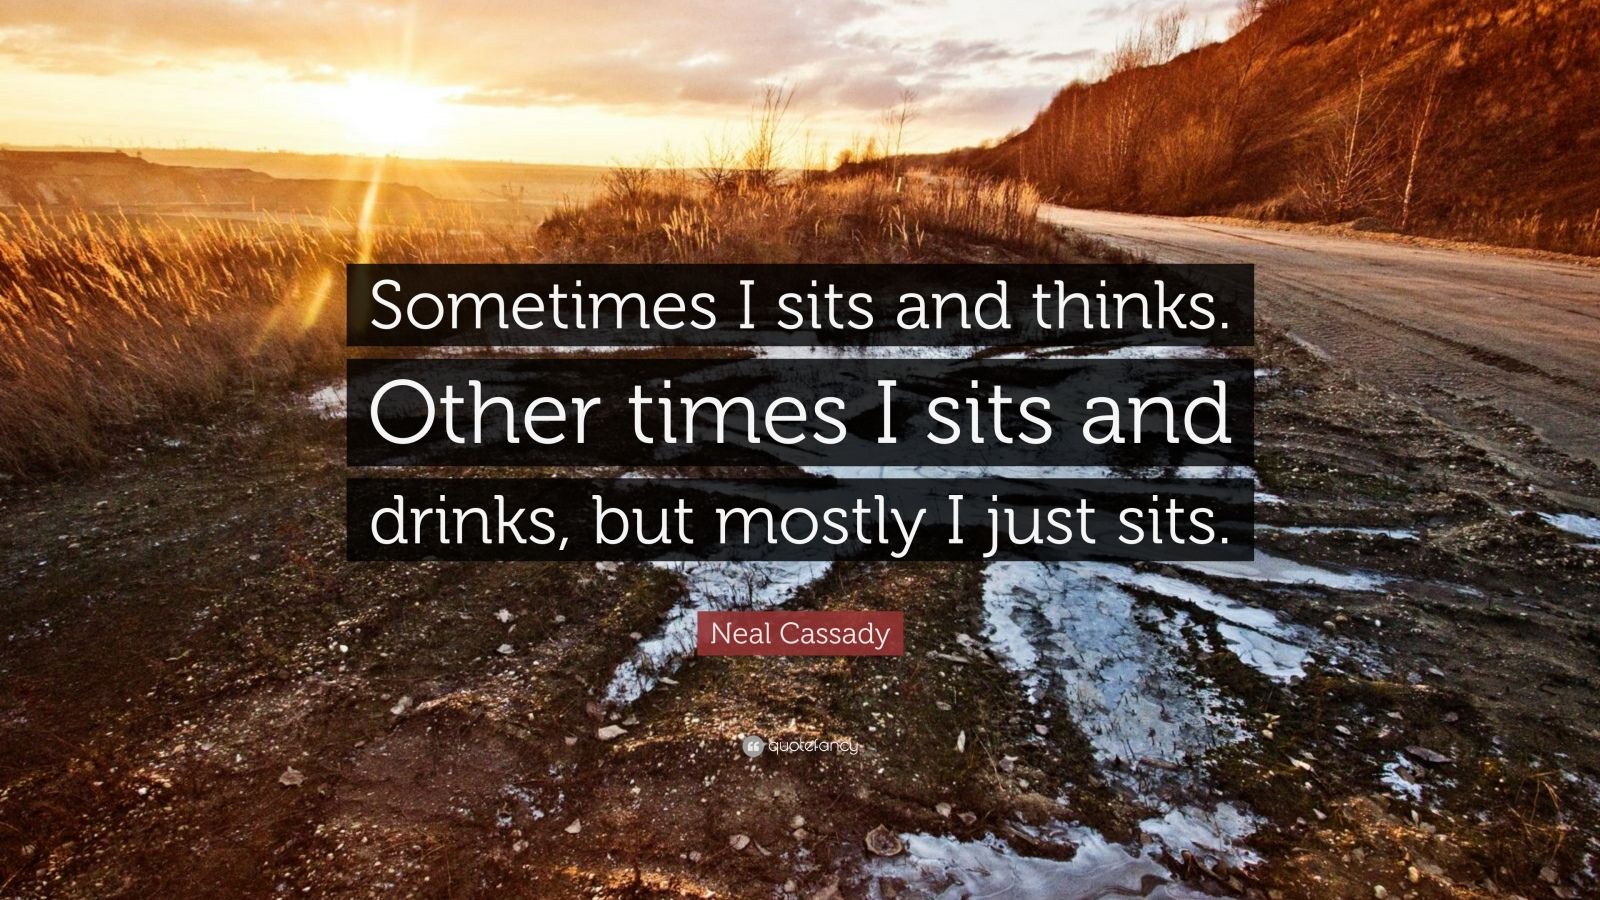 Neal Cassady Quote “sometimes I Sits And Thinks Other Times I Sits And Drinks But Mostly I 0499